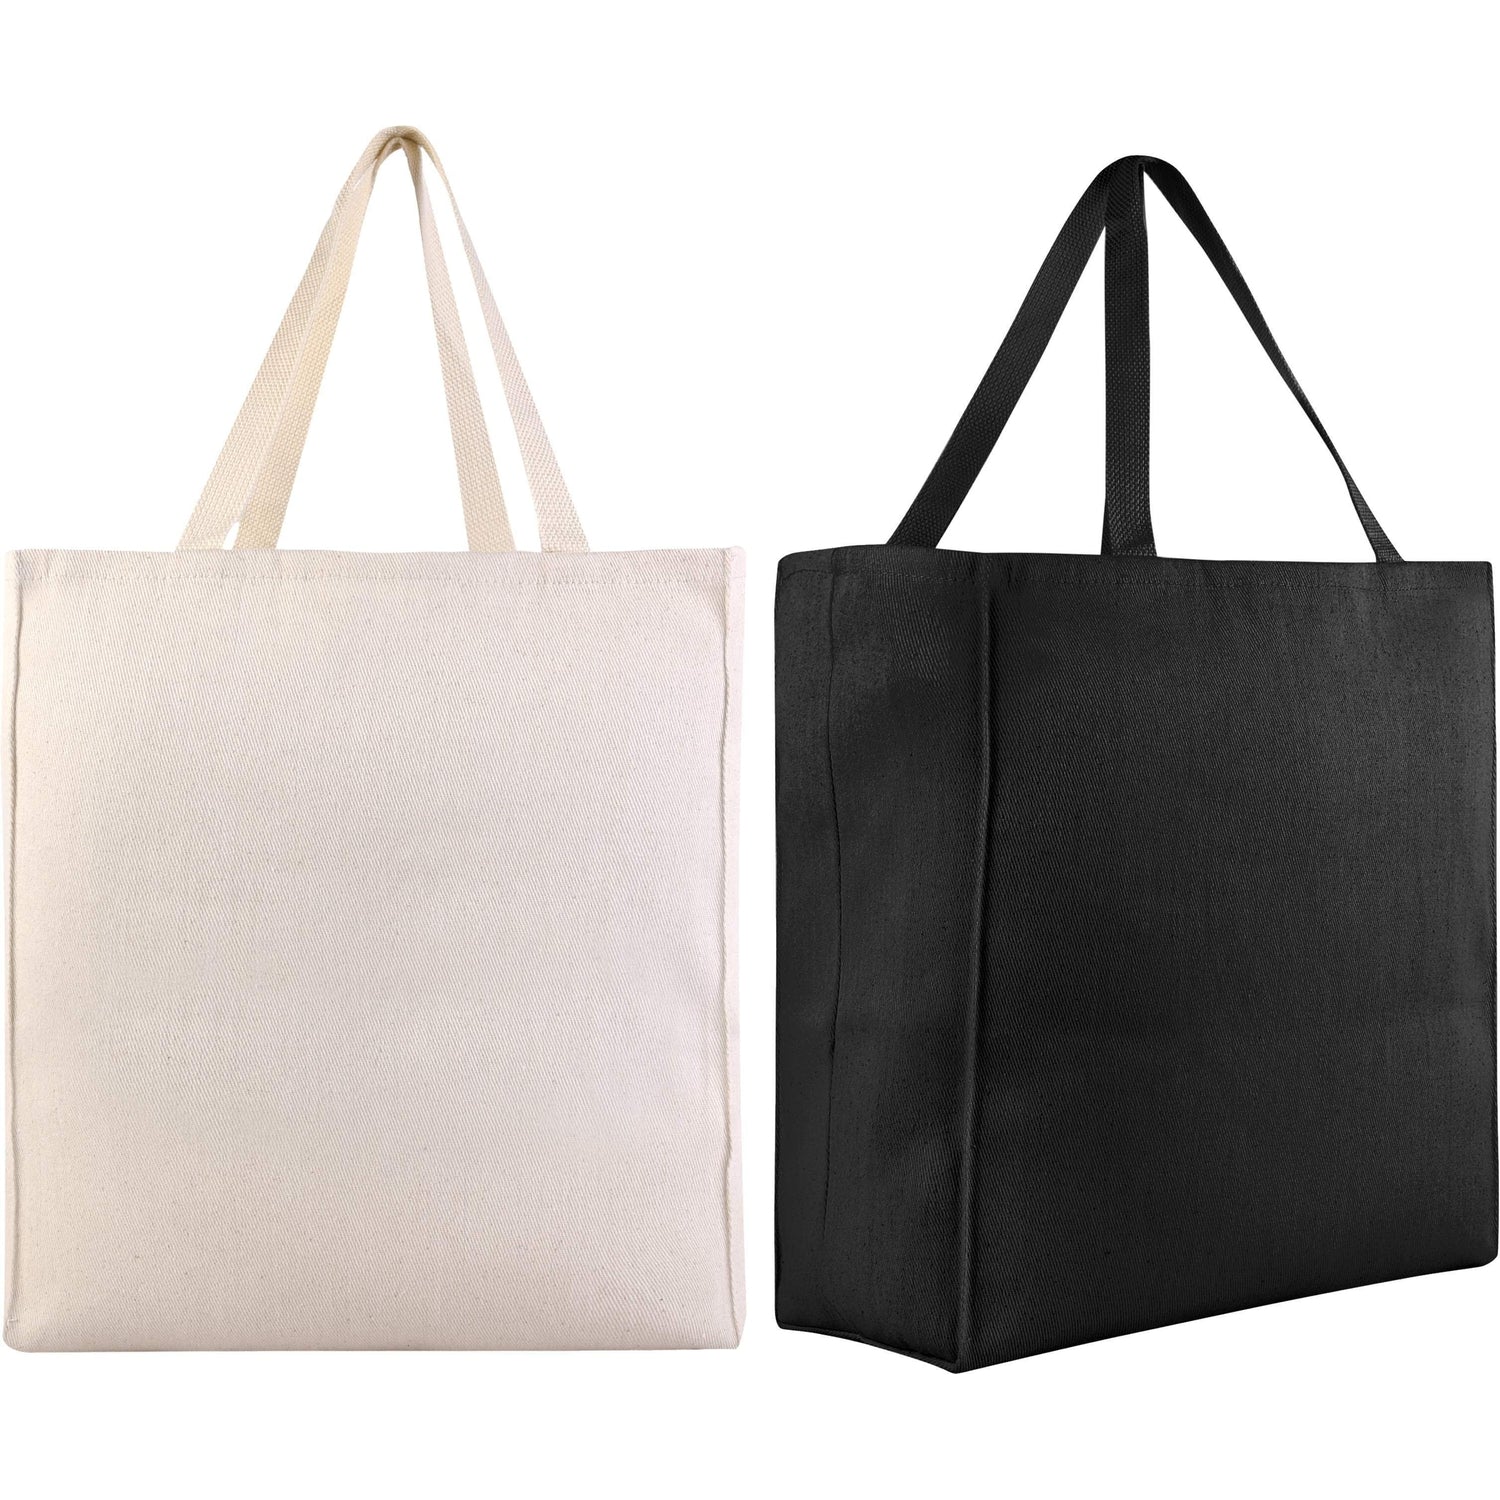 Reusable Shopping Bags | Cotton Twill Tote Bags & Grocery Bags in Bulk – BagzDepot™